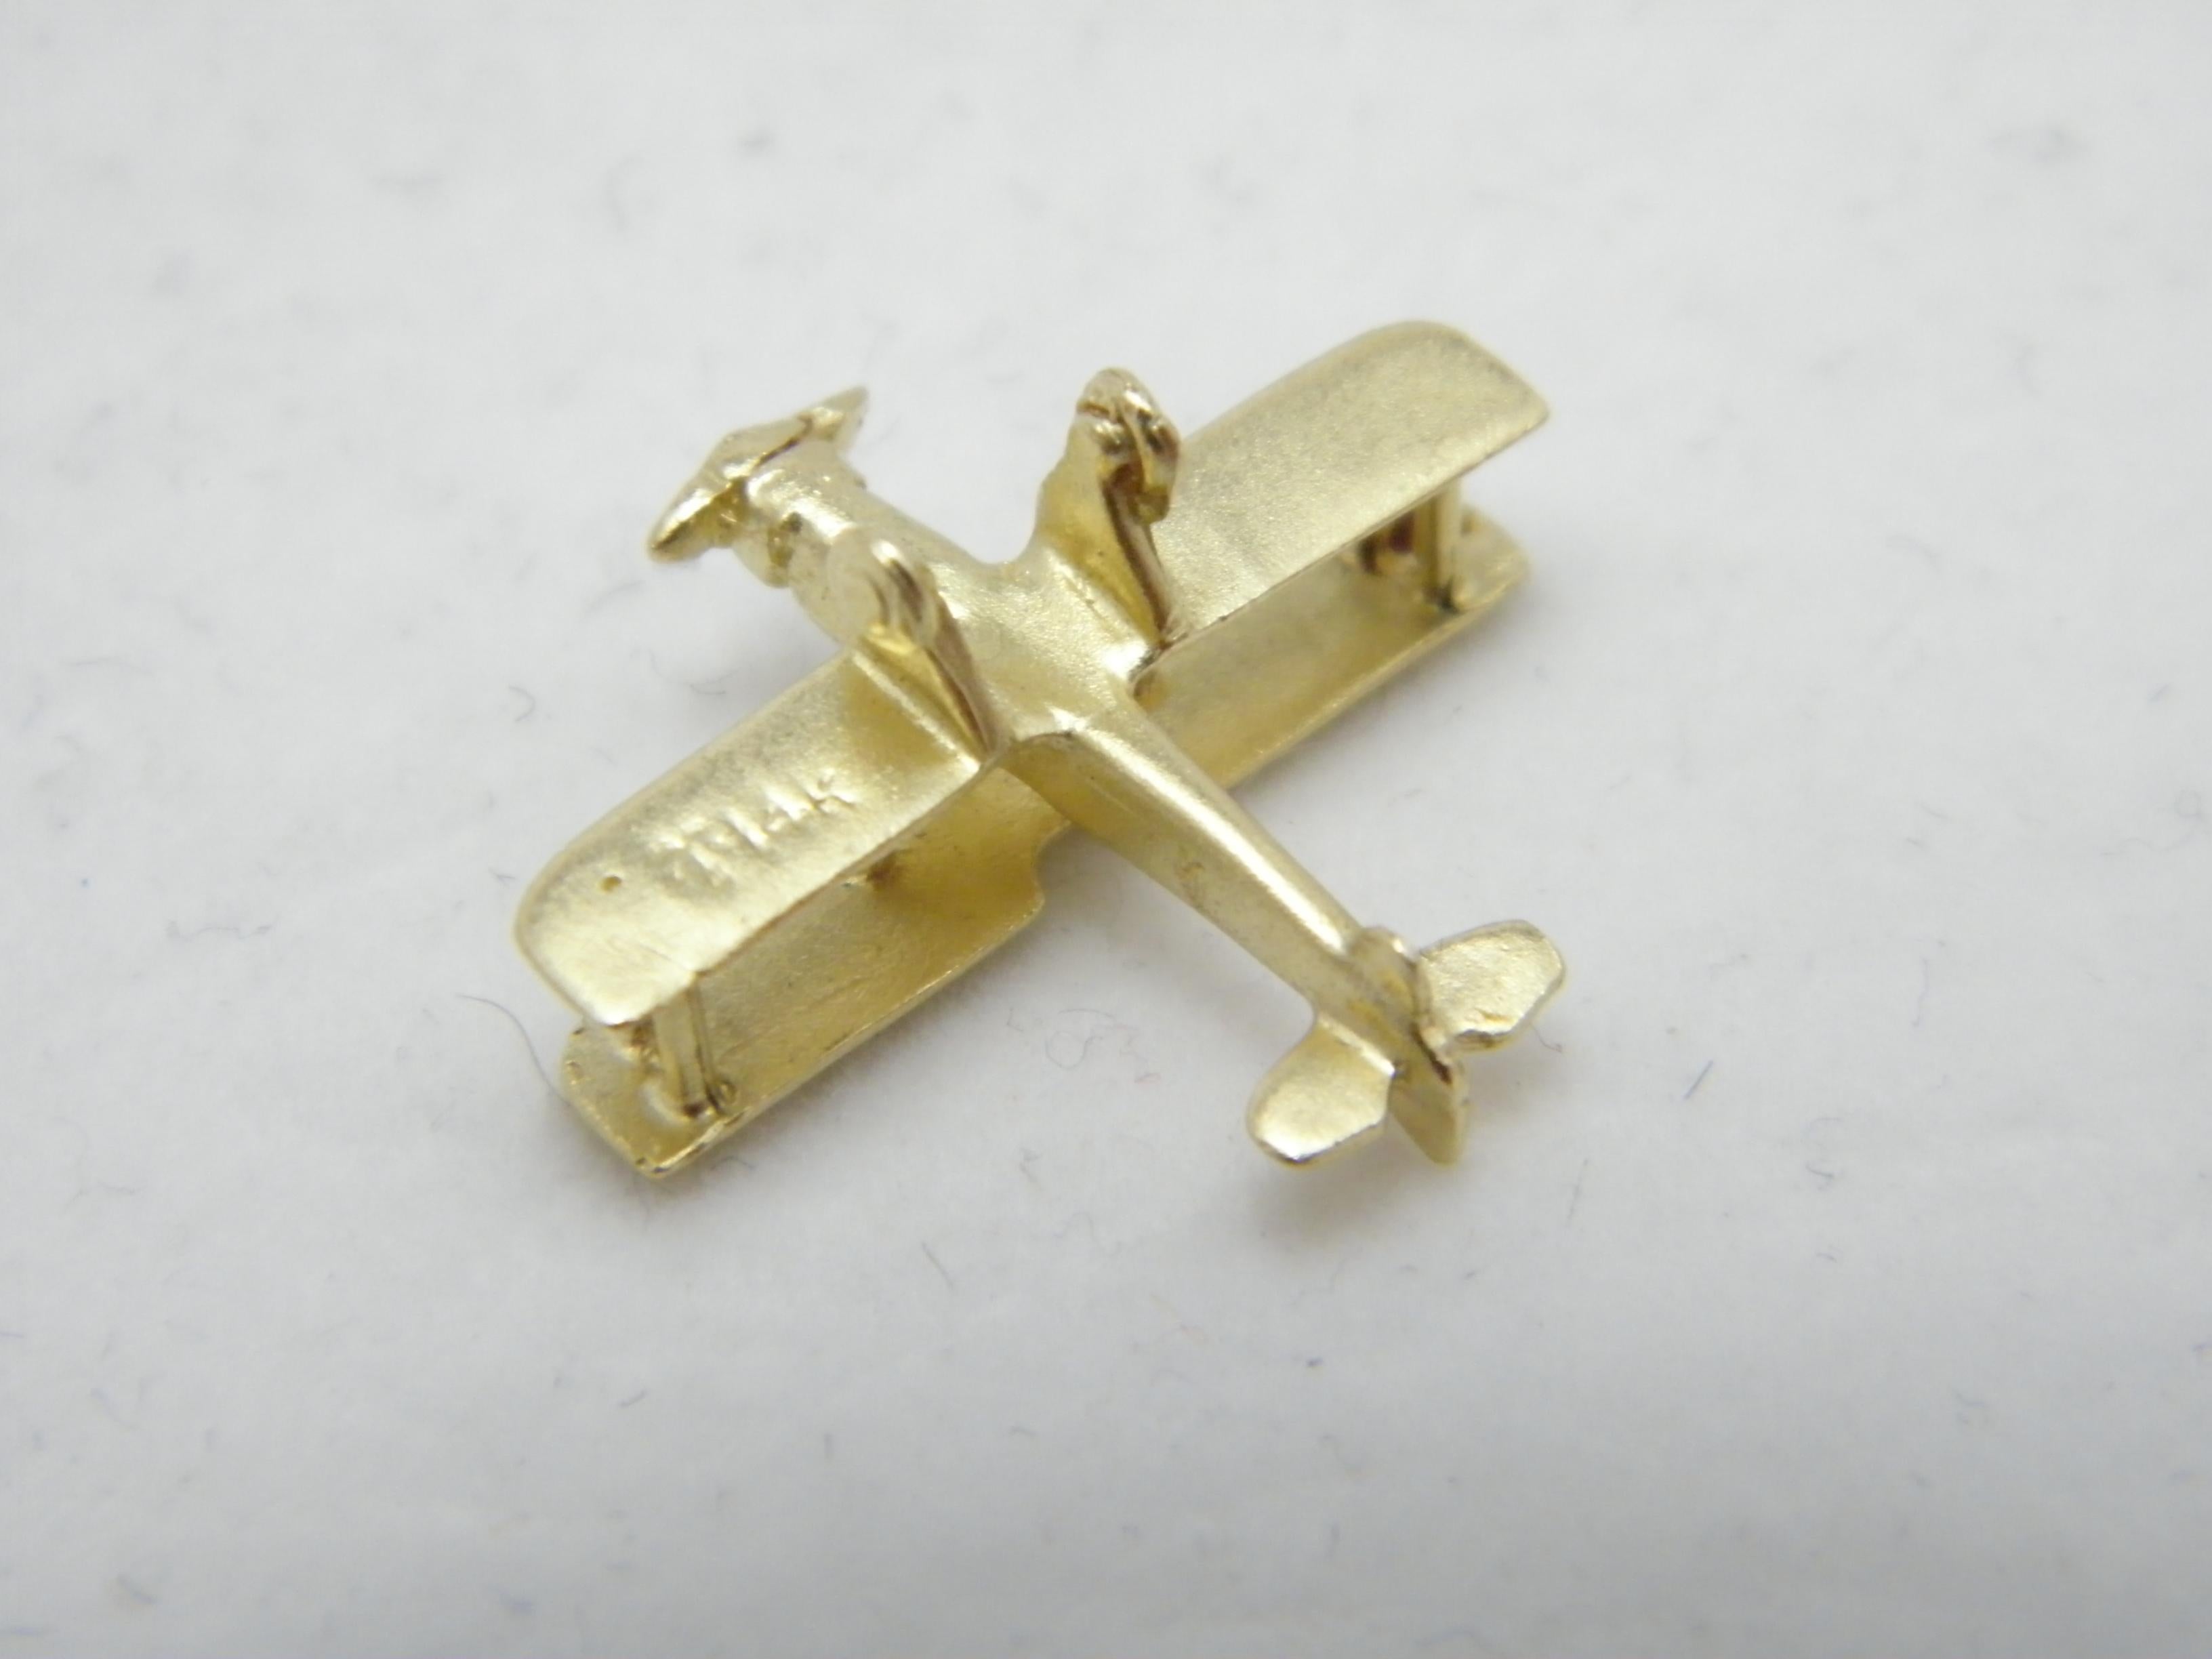 Vintage 14ct Gold Biplane Aeroplane Model Charm Fob c1970s 585 Purity Heavy For Sale 4